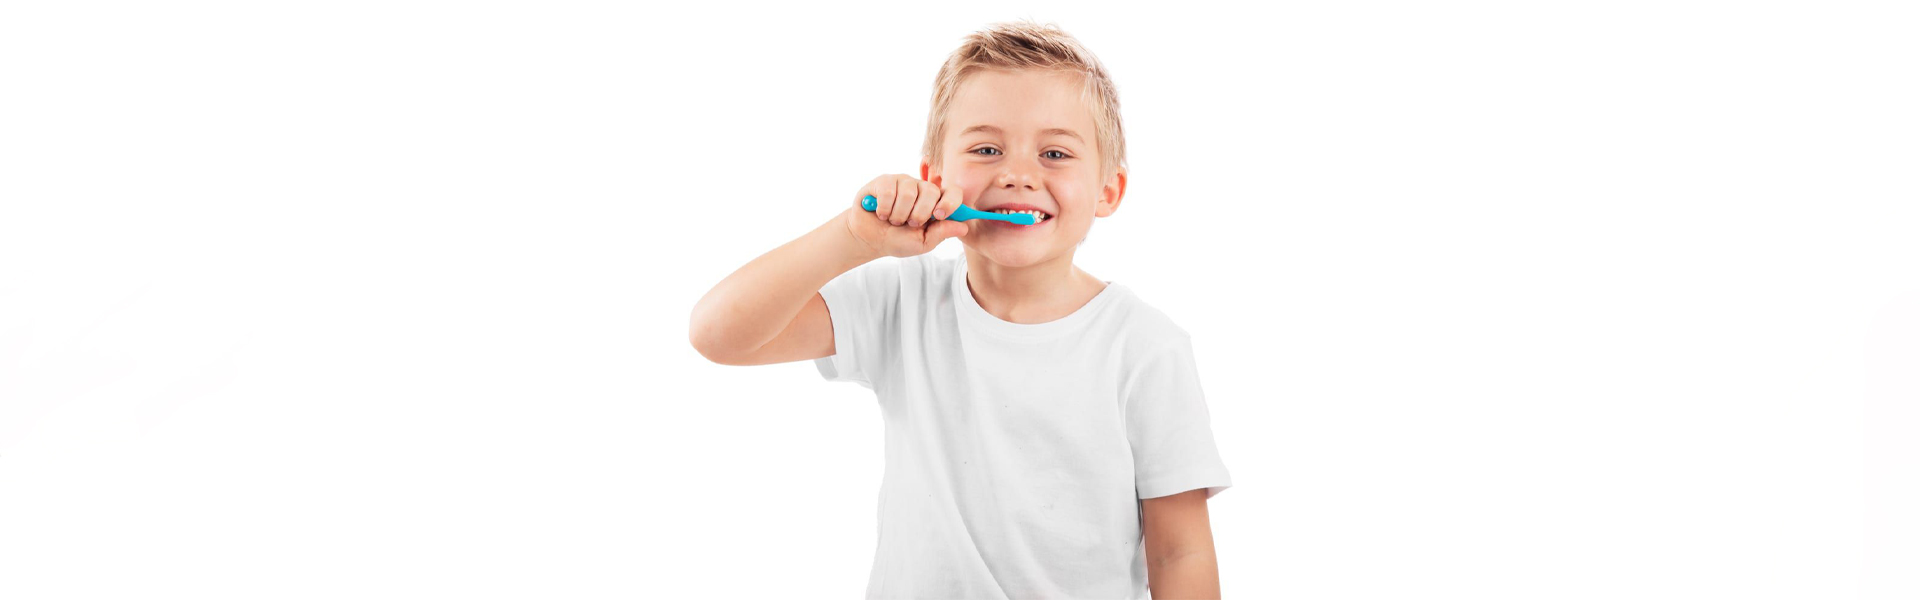 How to Help Your Child Develop Good Oral Habits and Avoid Bad Ones